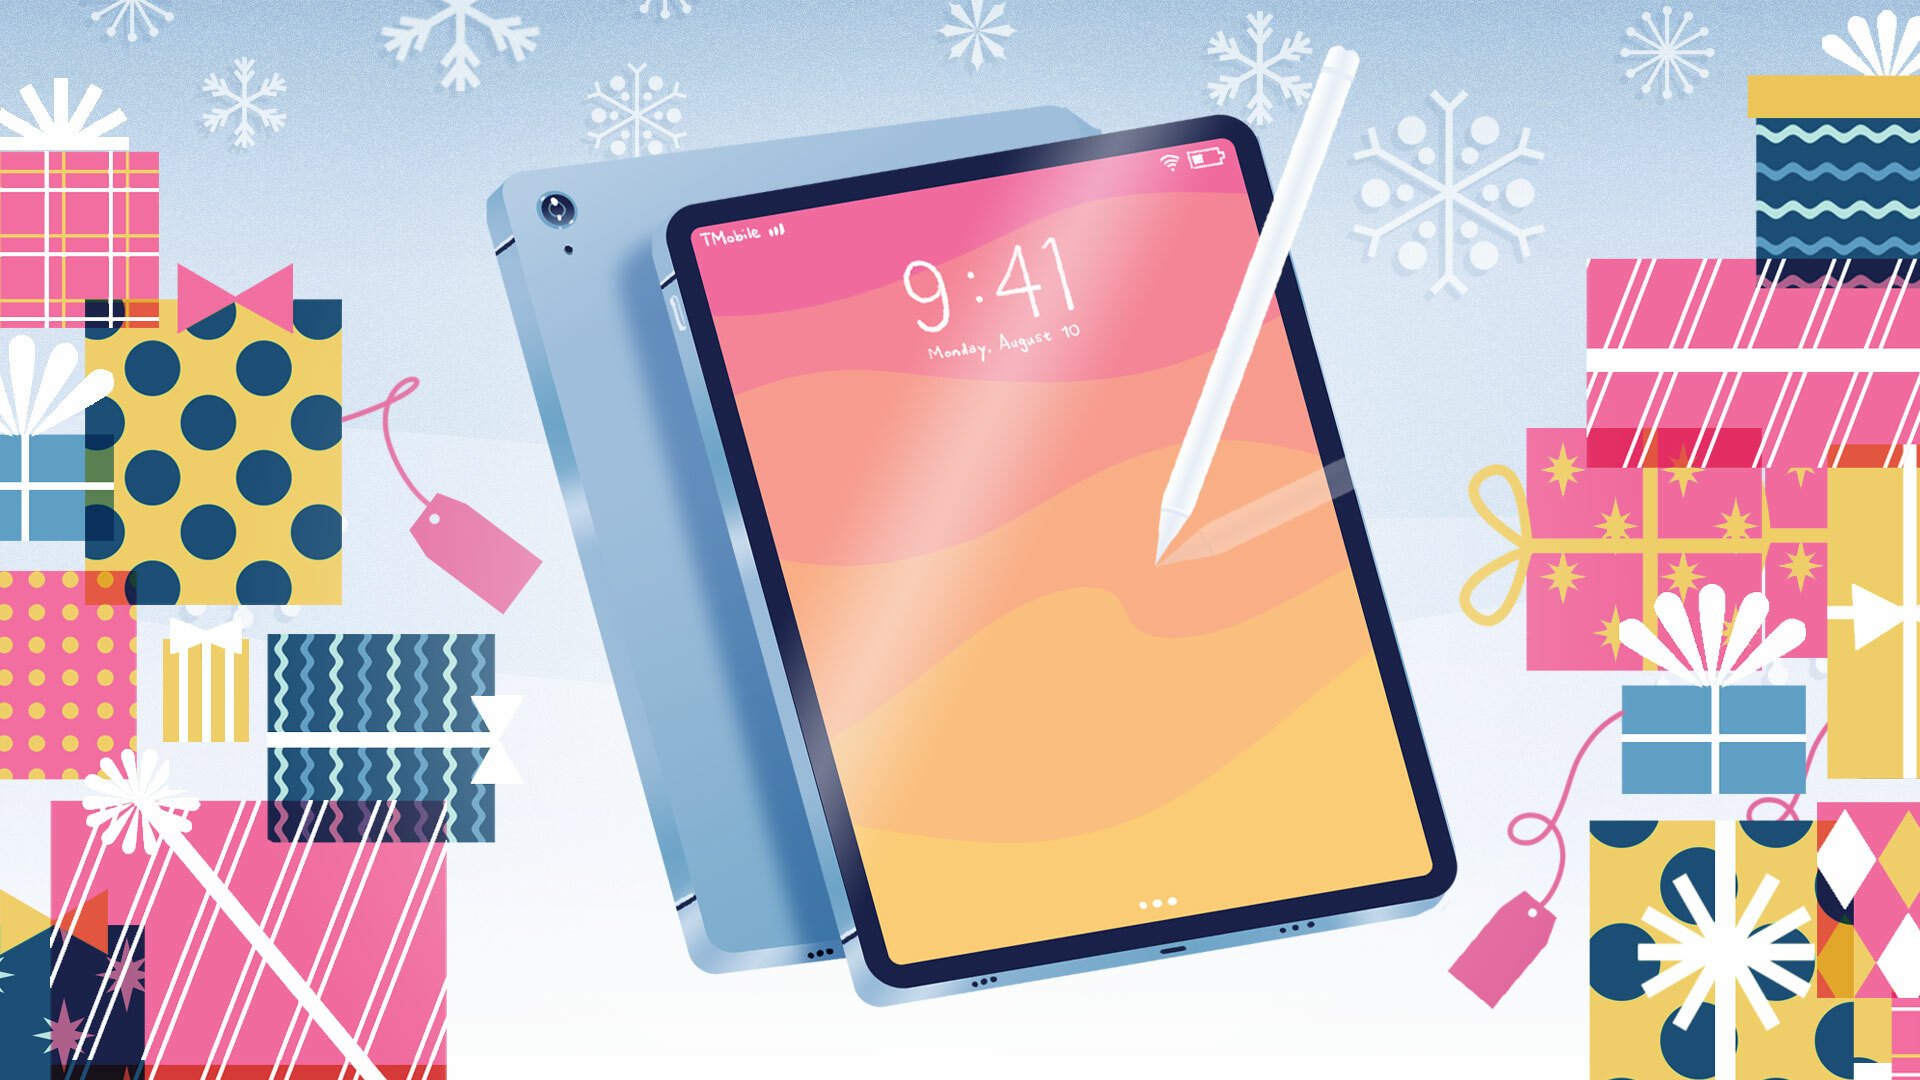 illustrated t-mobile tablet with gifts and snowflakes in background